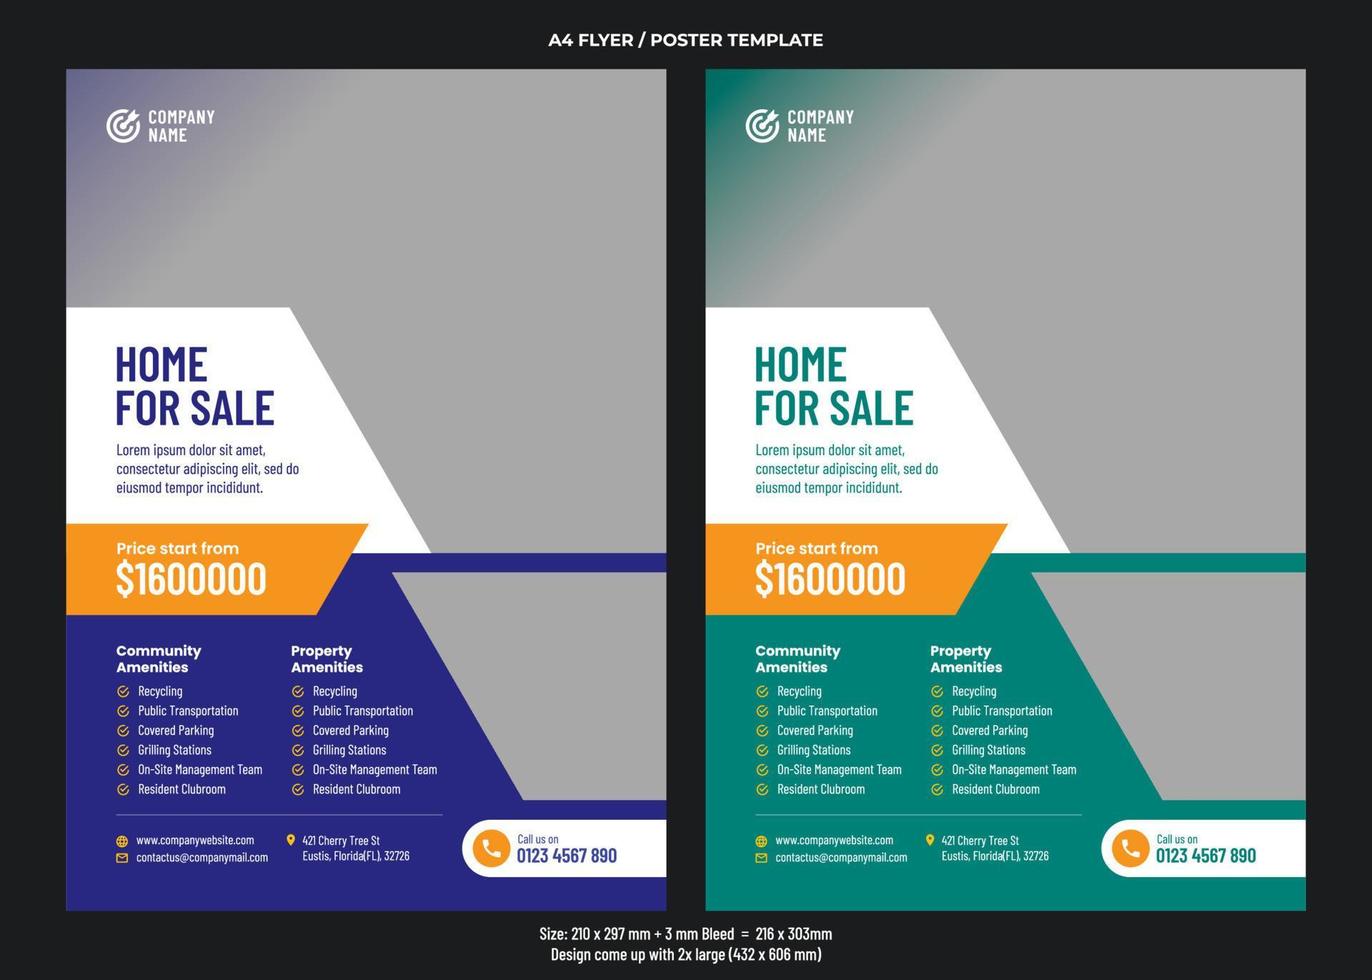 Real estate or house sale A4 flyer or poster design template vector